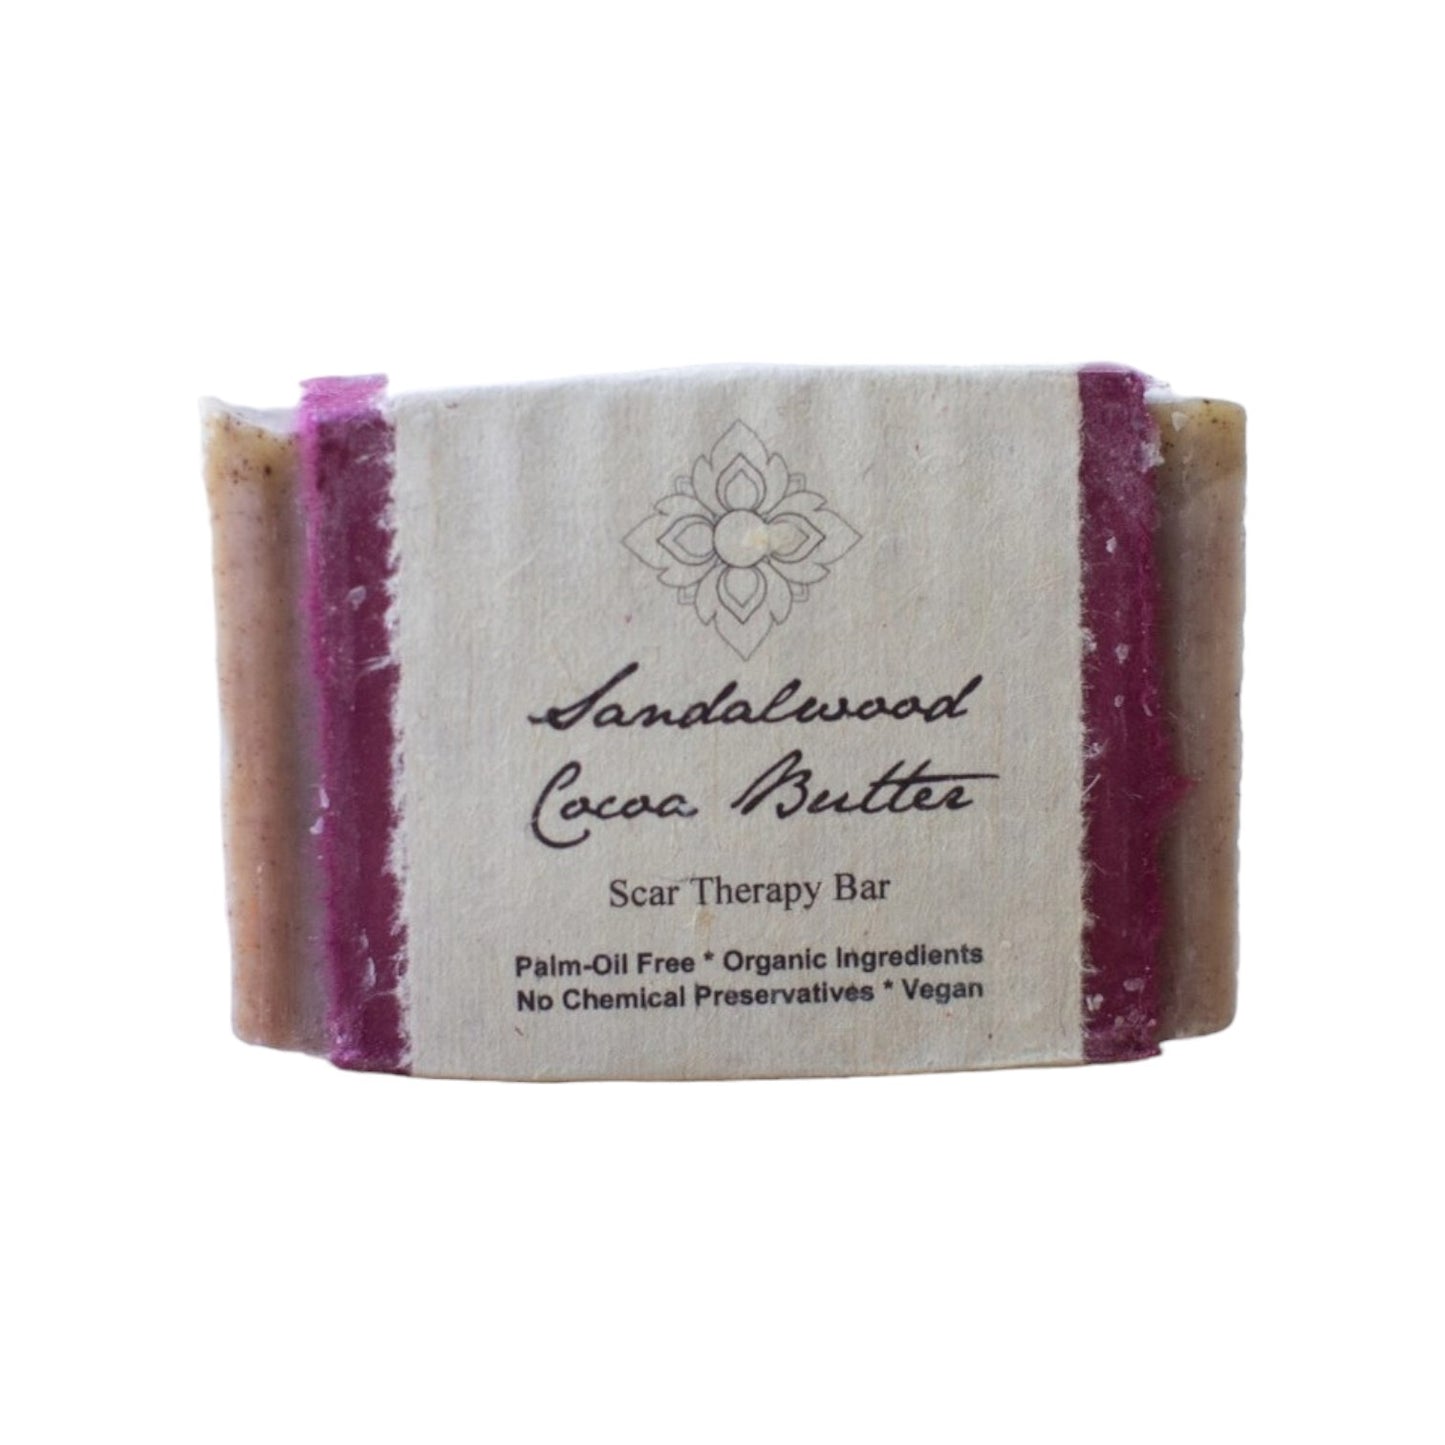 Handmade Soap Bar with the scent of Sandlewood and Cocoa Butter for scar therapy